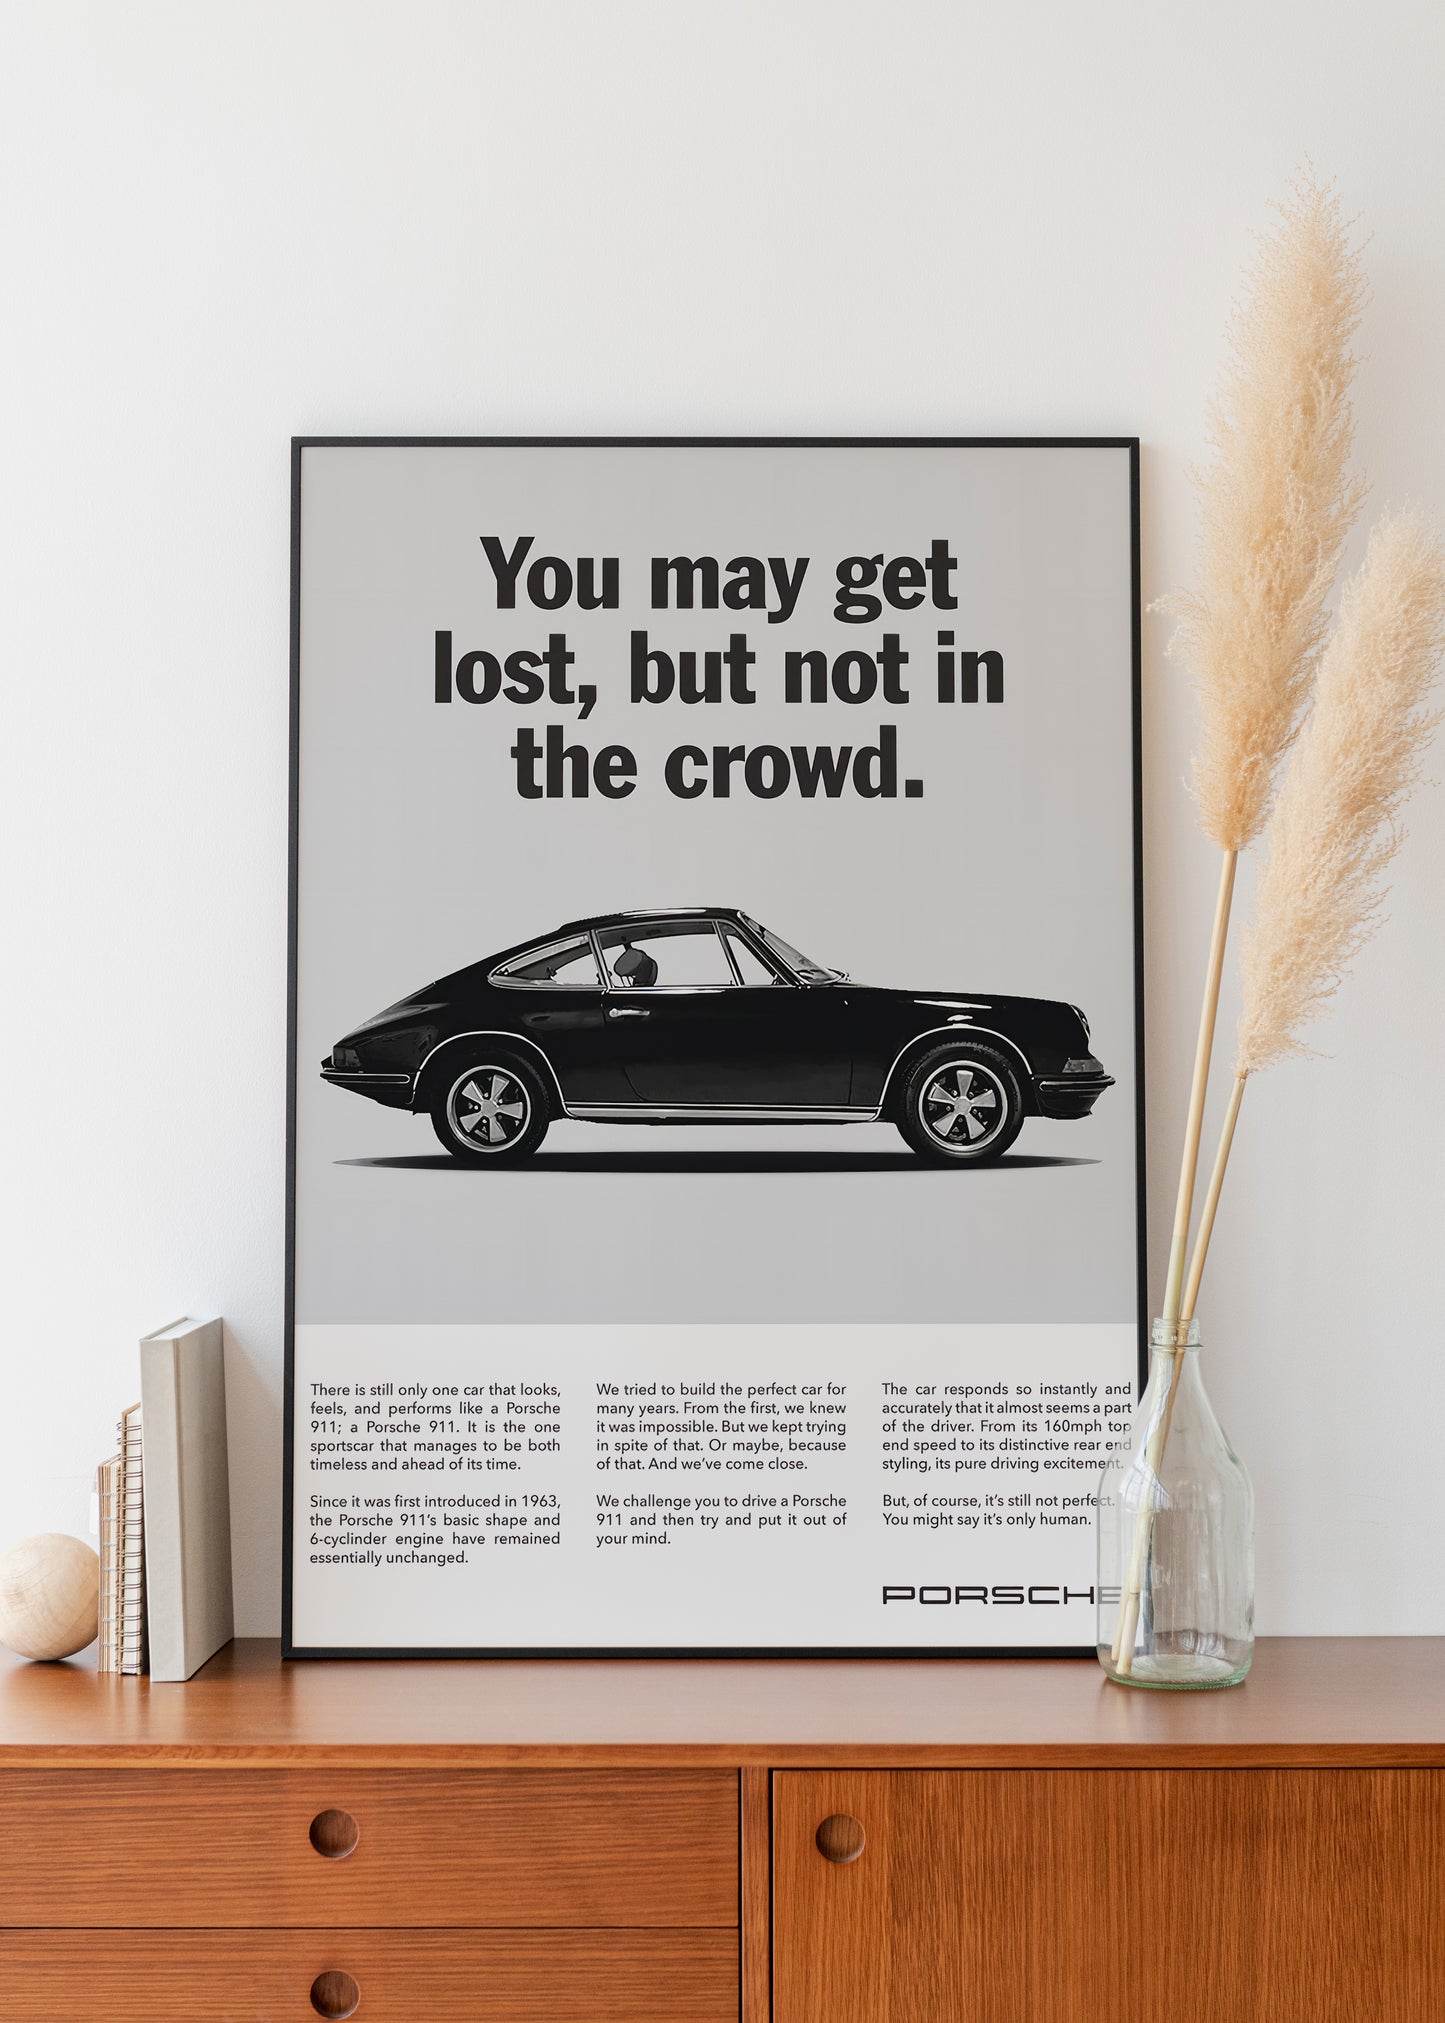 Porsche "You May Get Lost, But Not In The Crowd" Poster